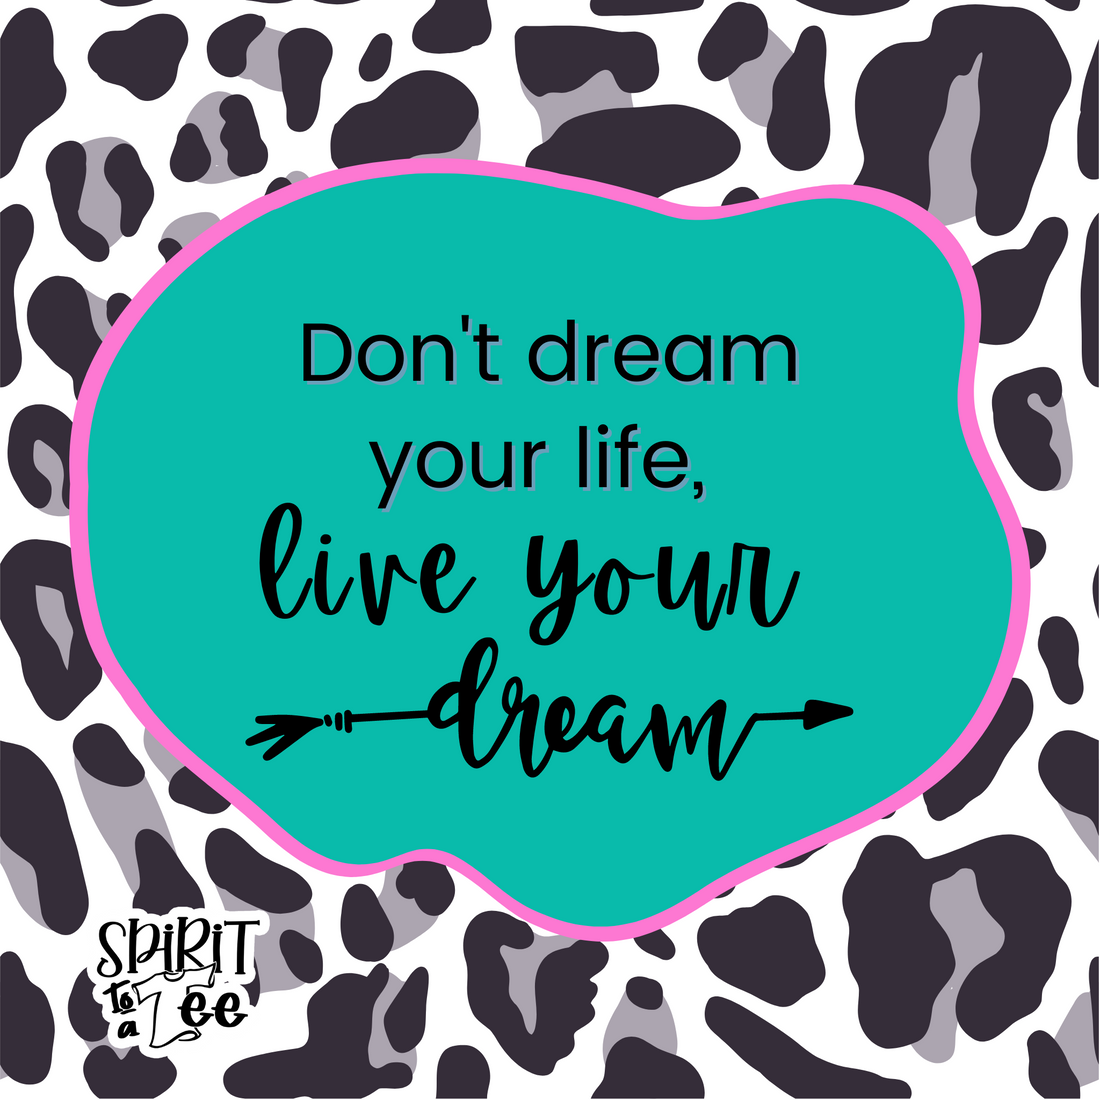 Live your dream!